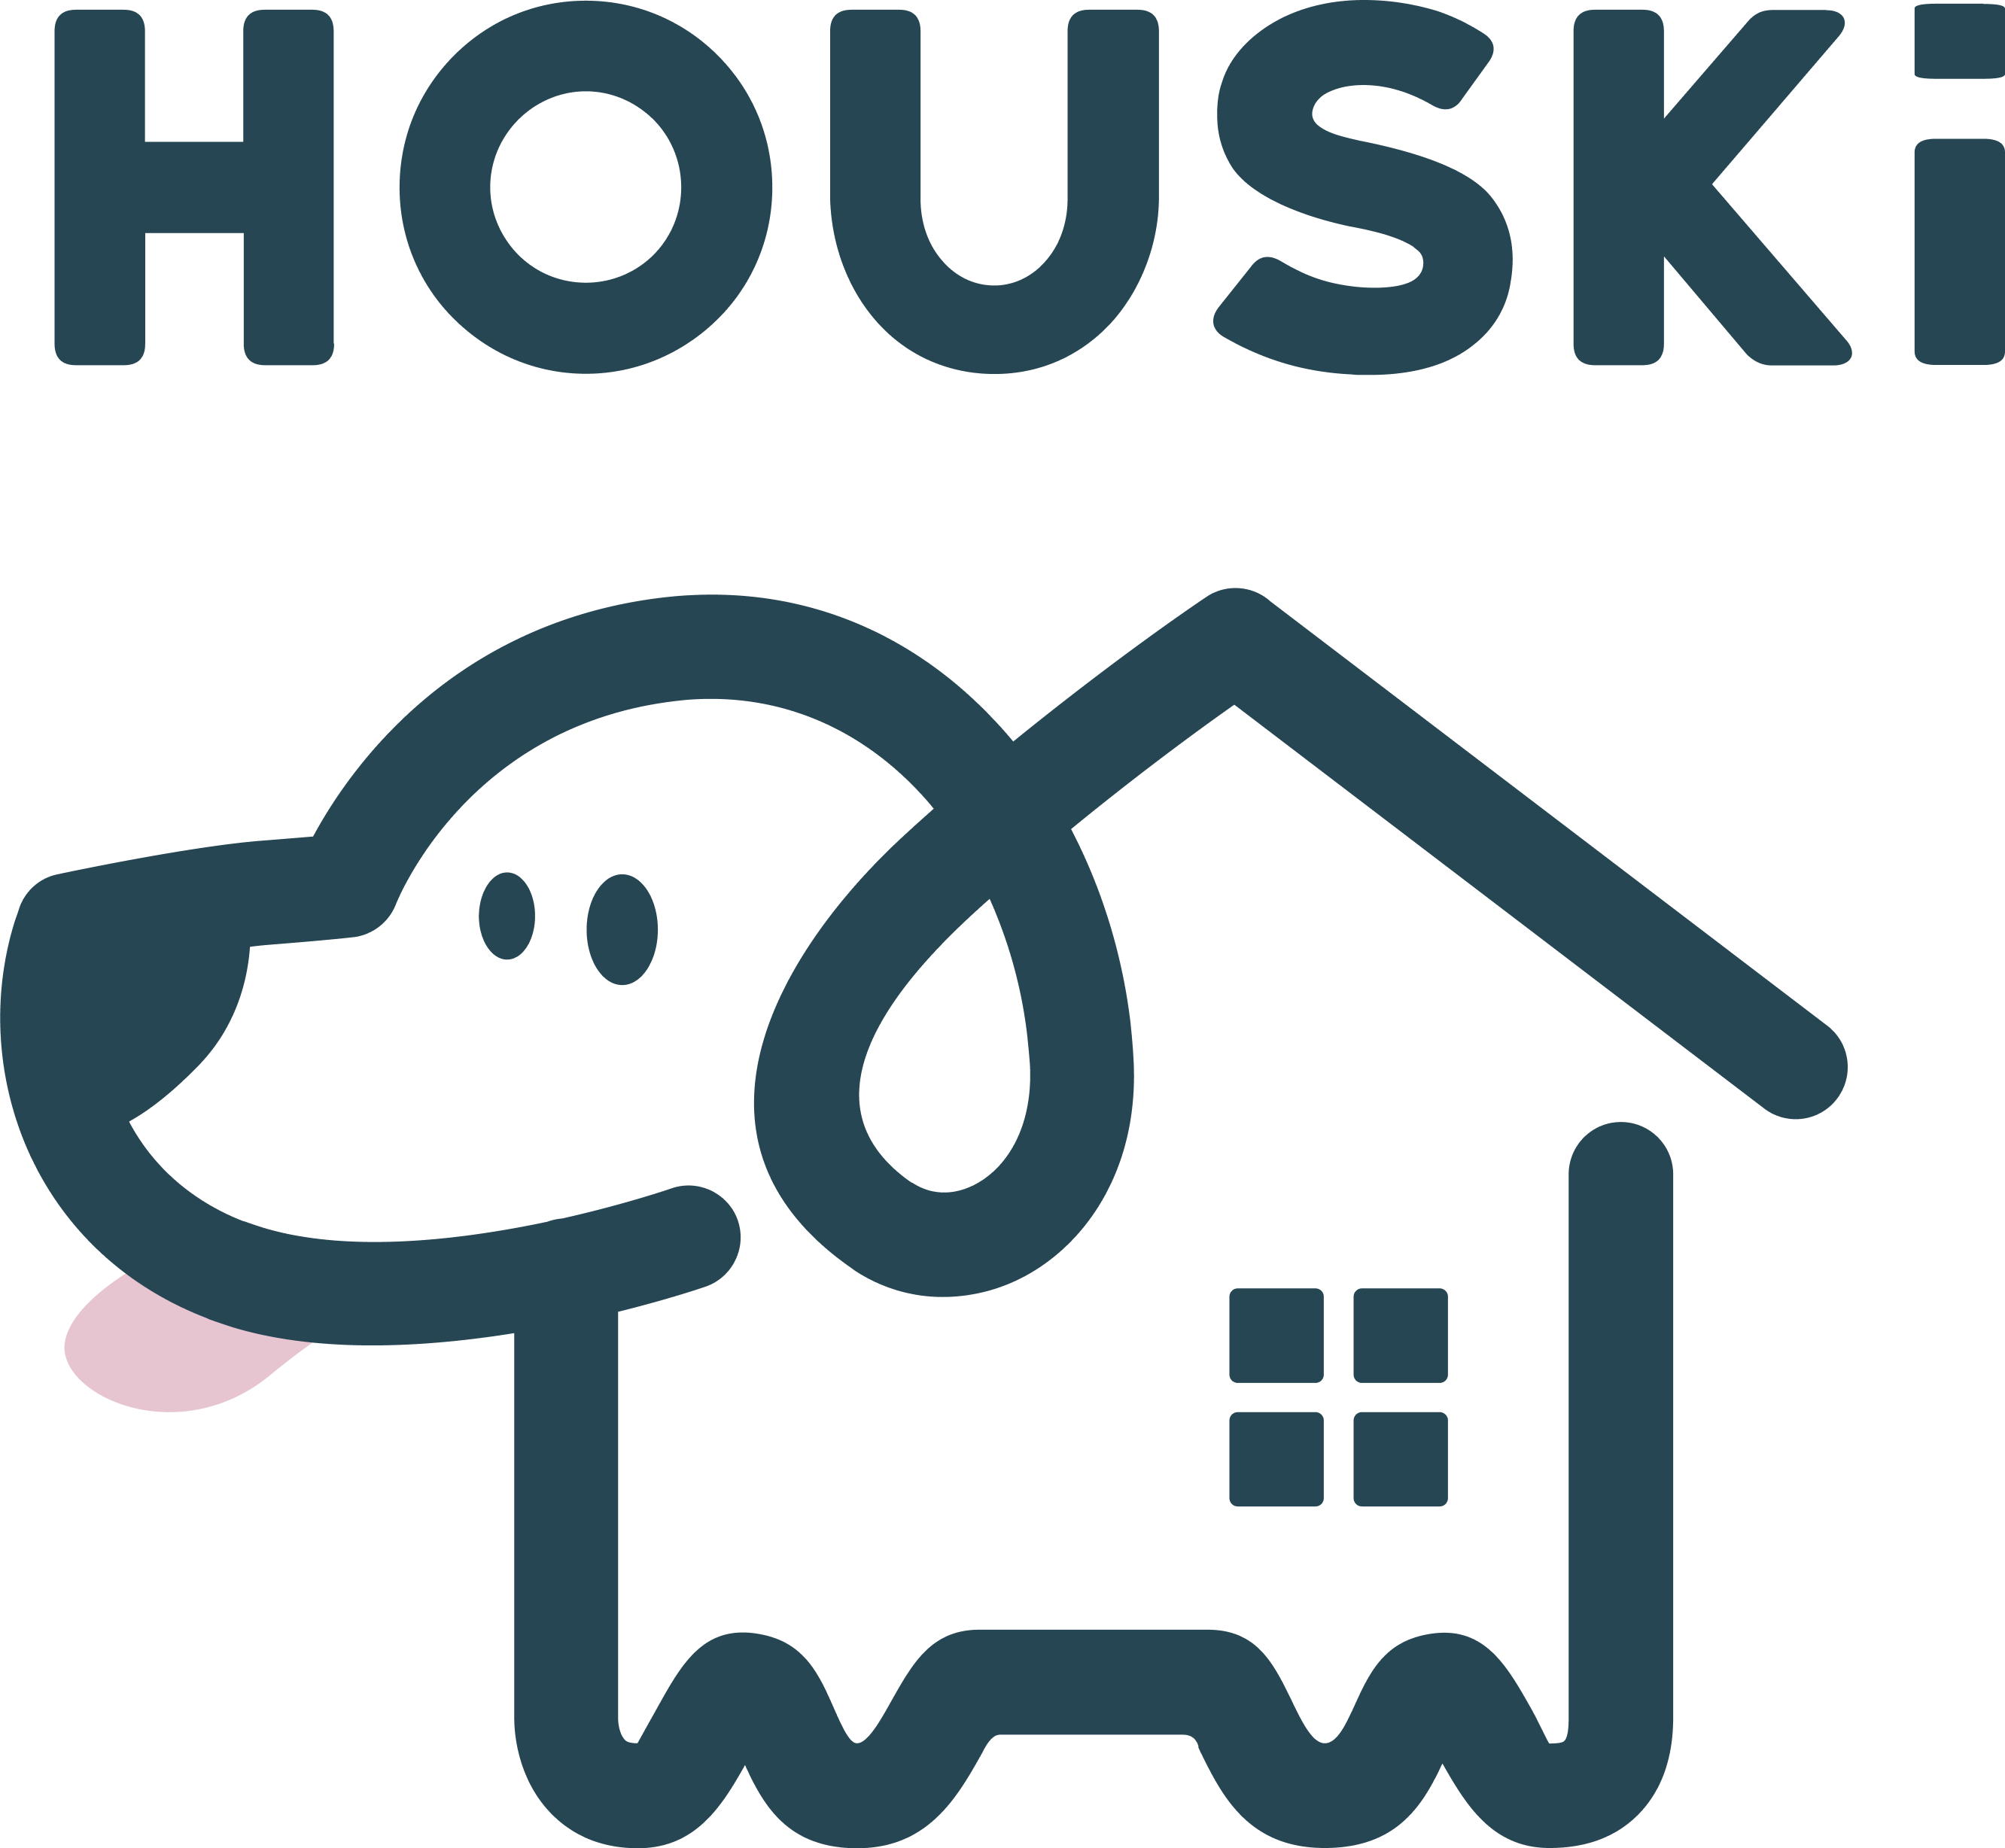 Article about Houski - Push button, get mortgage for Canadians